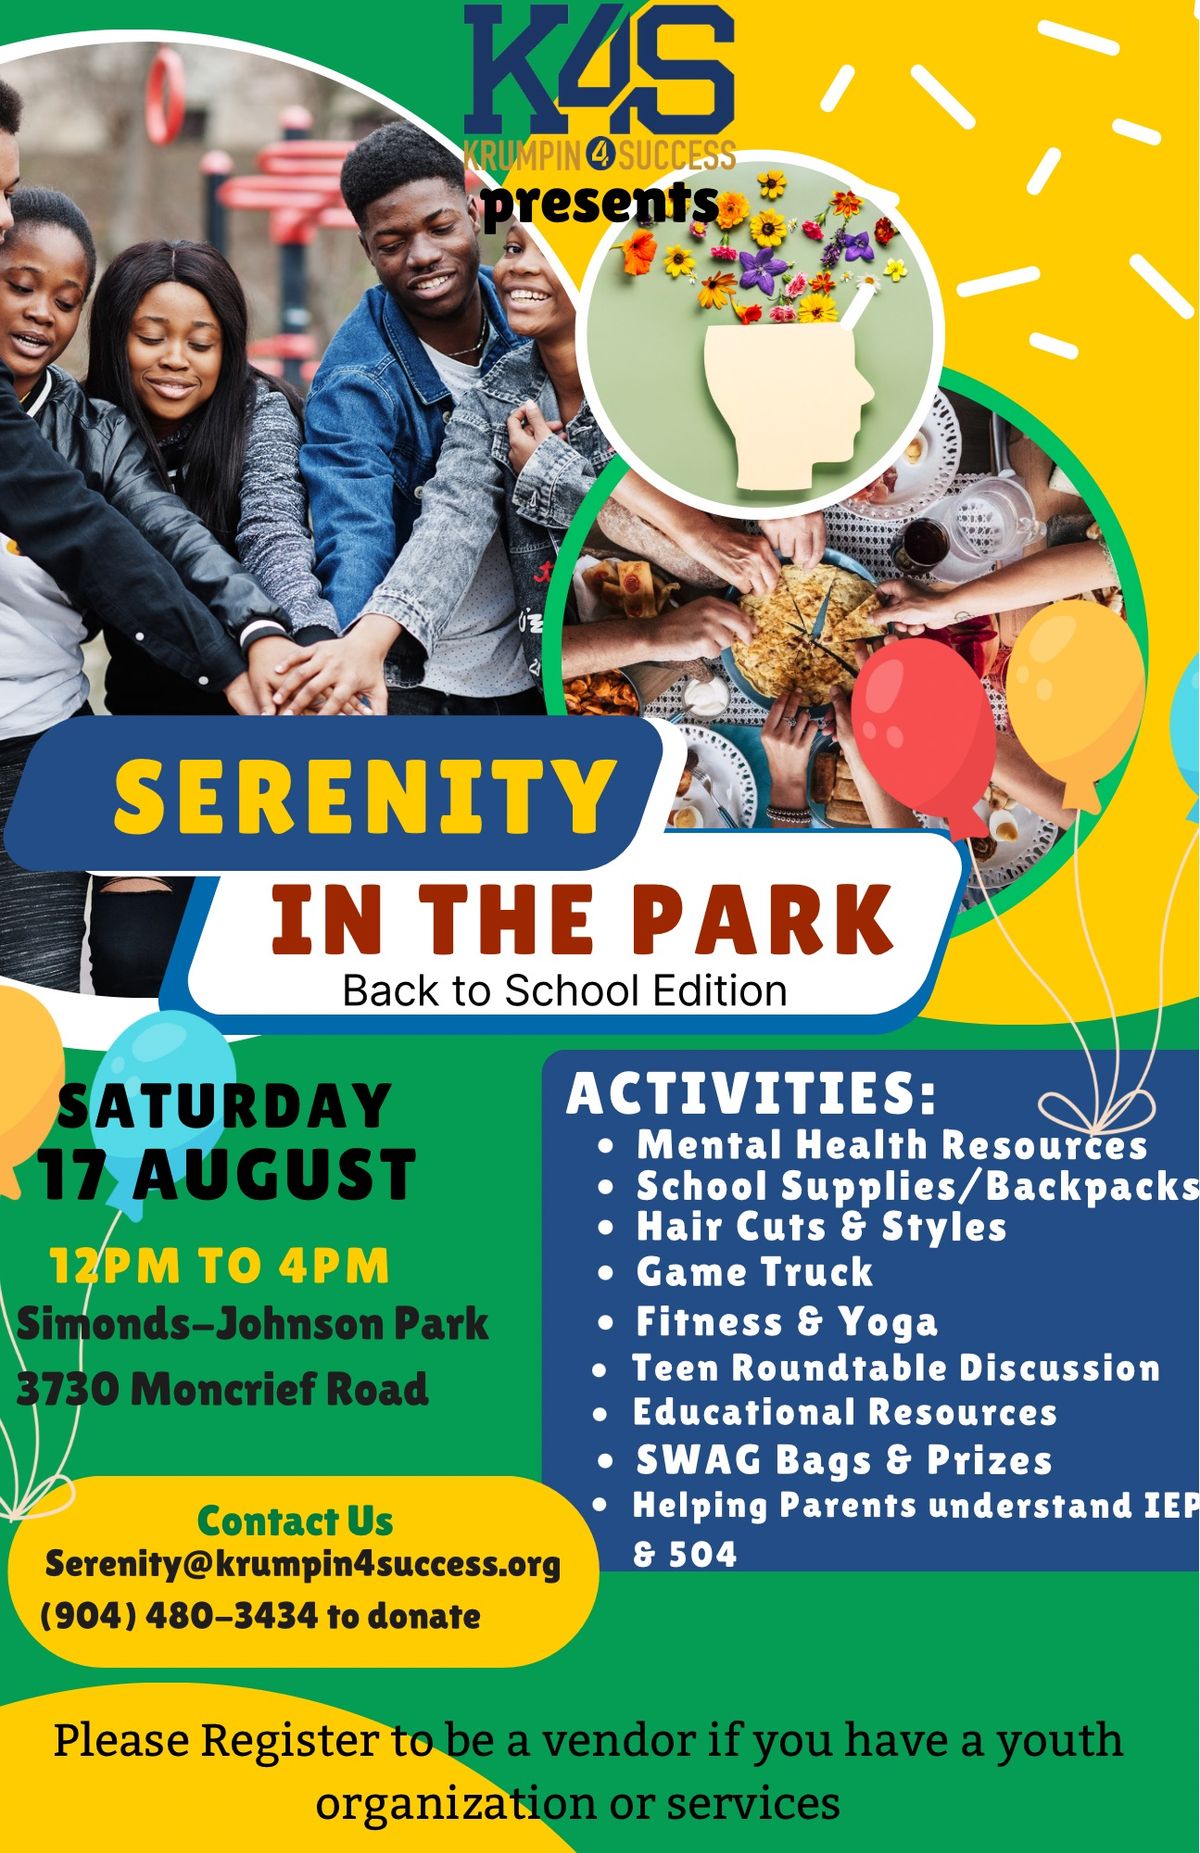 Serenity in the Park: Back to School Edition